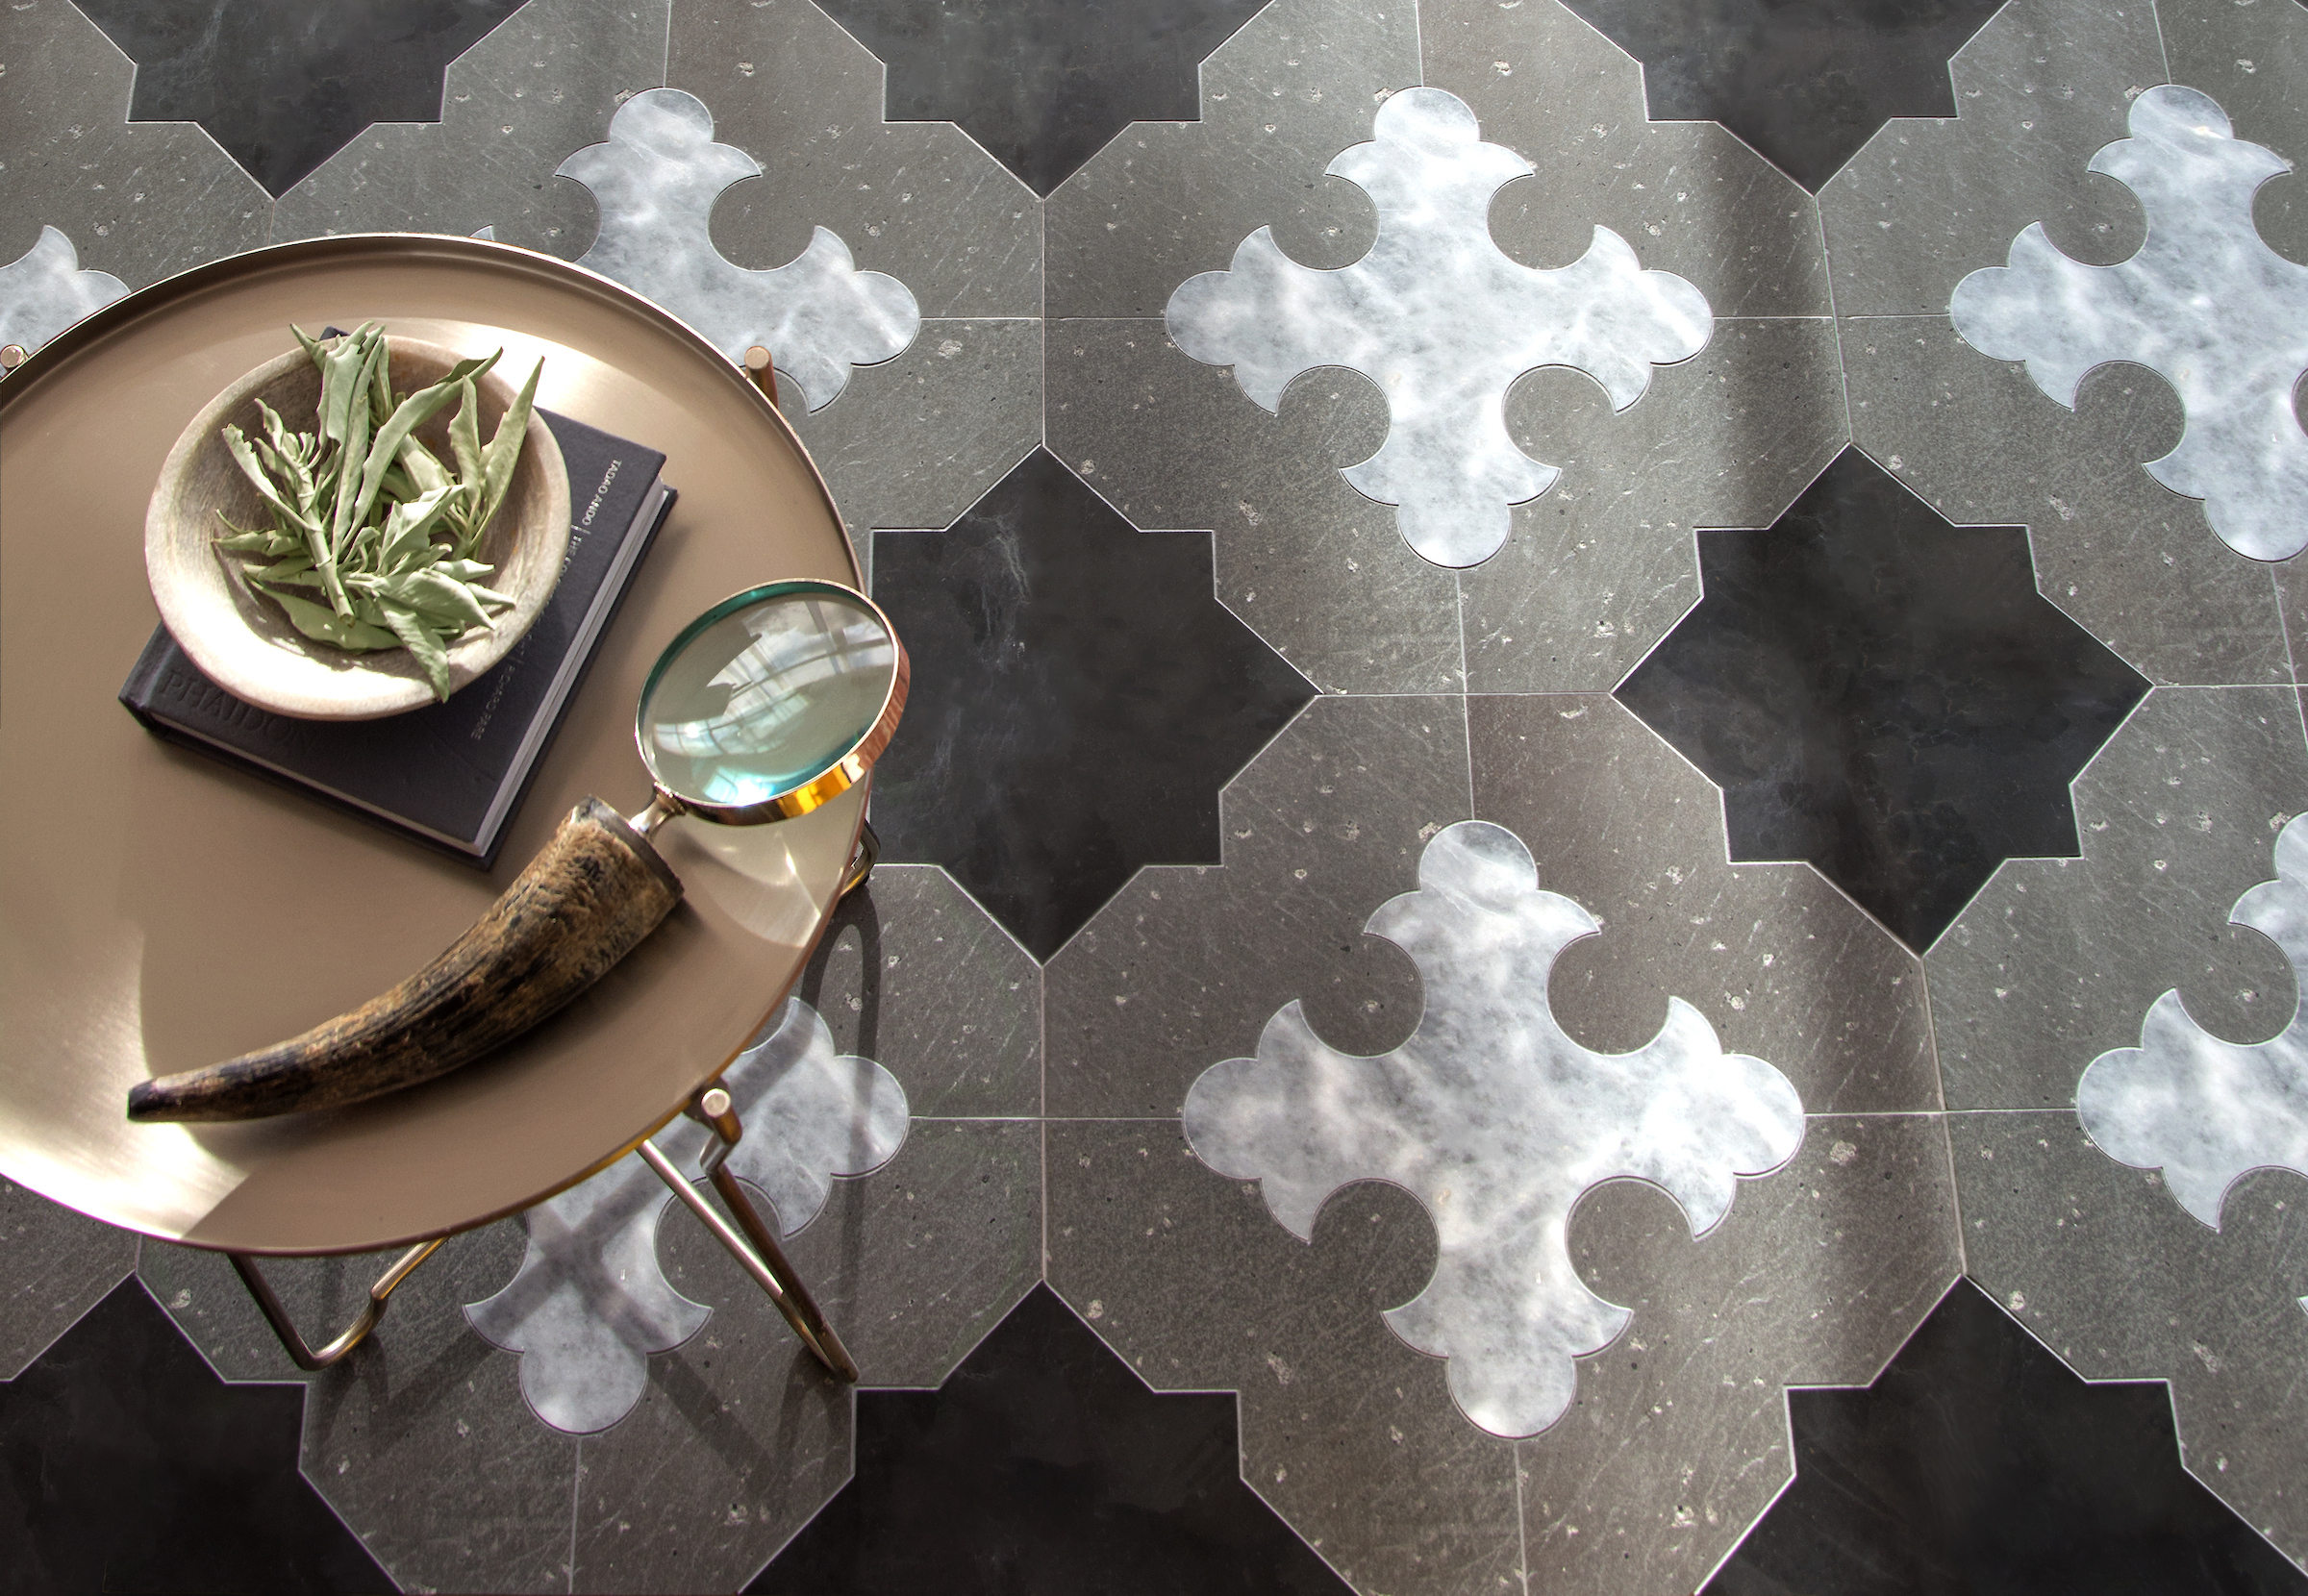 A symbiotic relationship between Schatz and New Ravenna’s new creative director, Cean Irminger, has yielded 20 new mosaic designs for the Miraflores Collection.